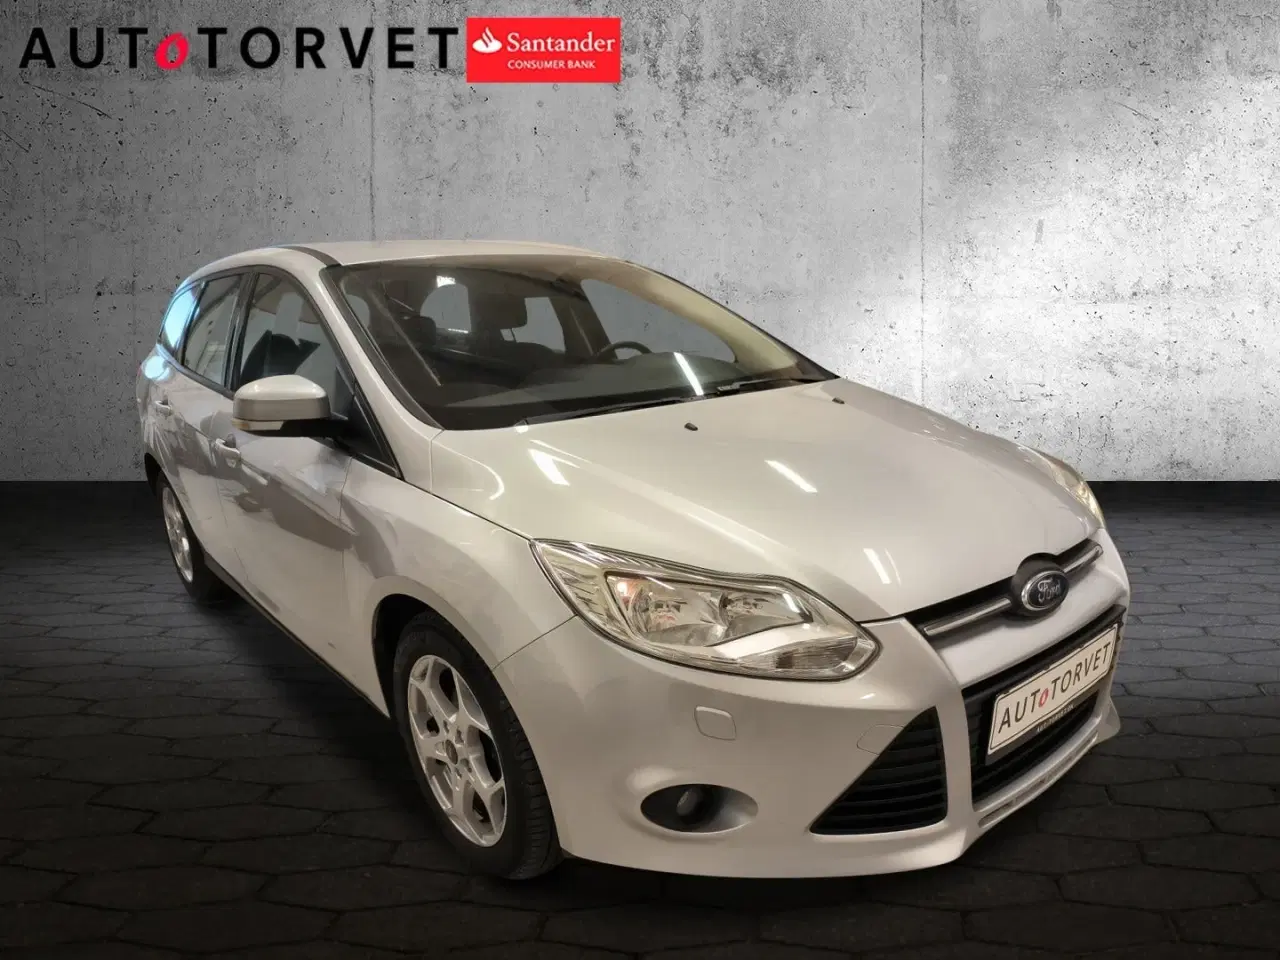 Billede 2 - Ford Focus 1,0 SCTi 125 Edition stc. ECO